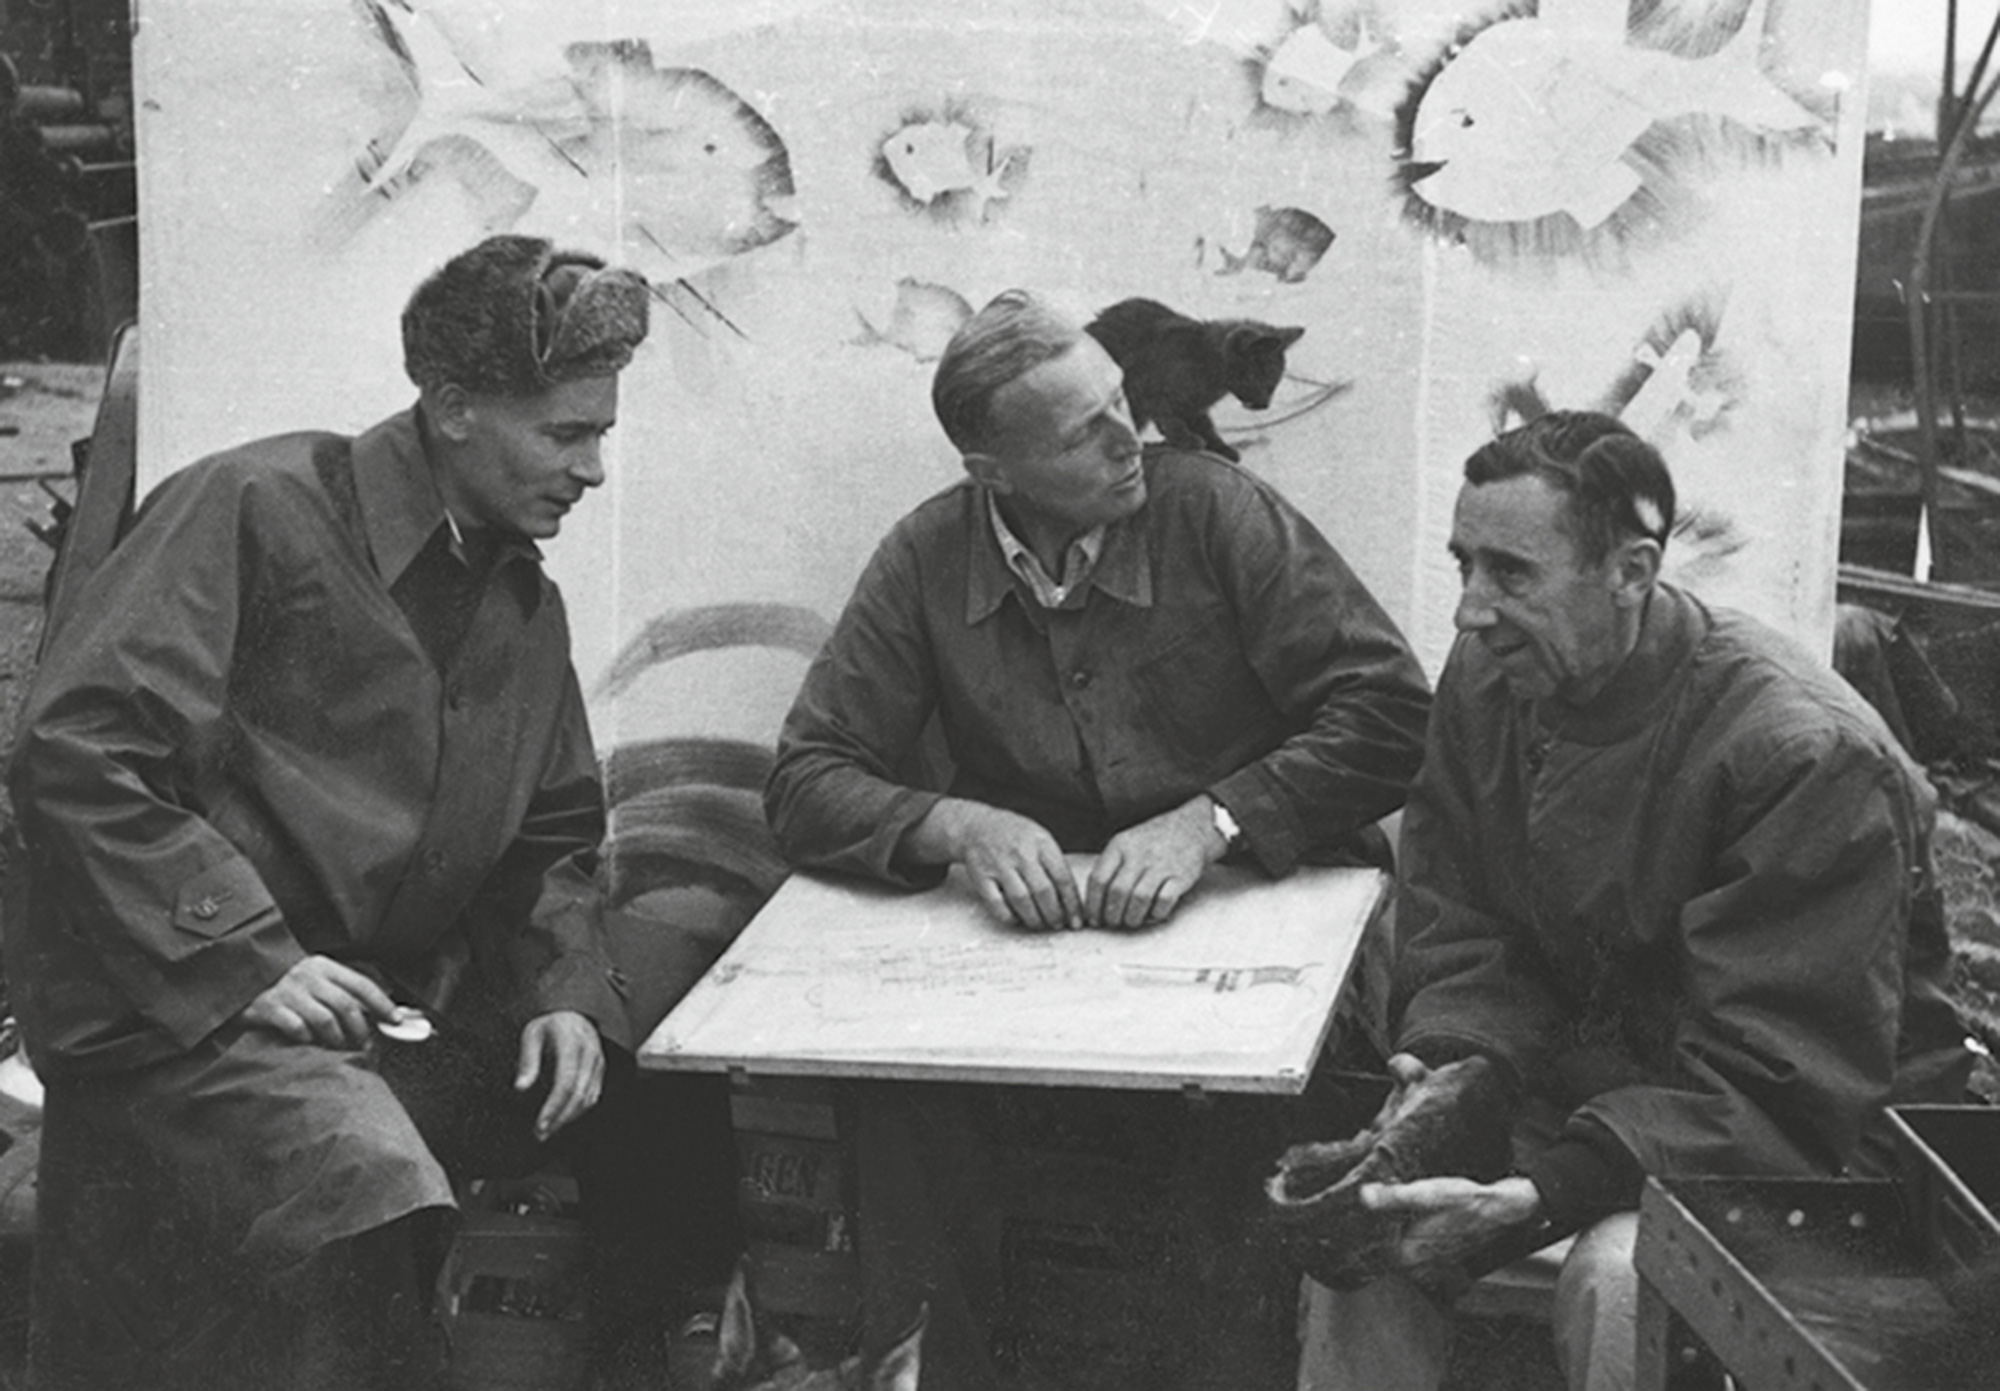 A photograph of Sellner and Tailliez enjoying the company of one of the many cats that assisted on the project.